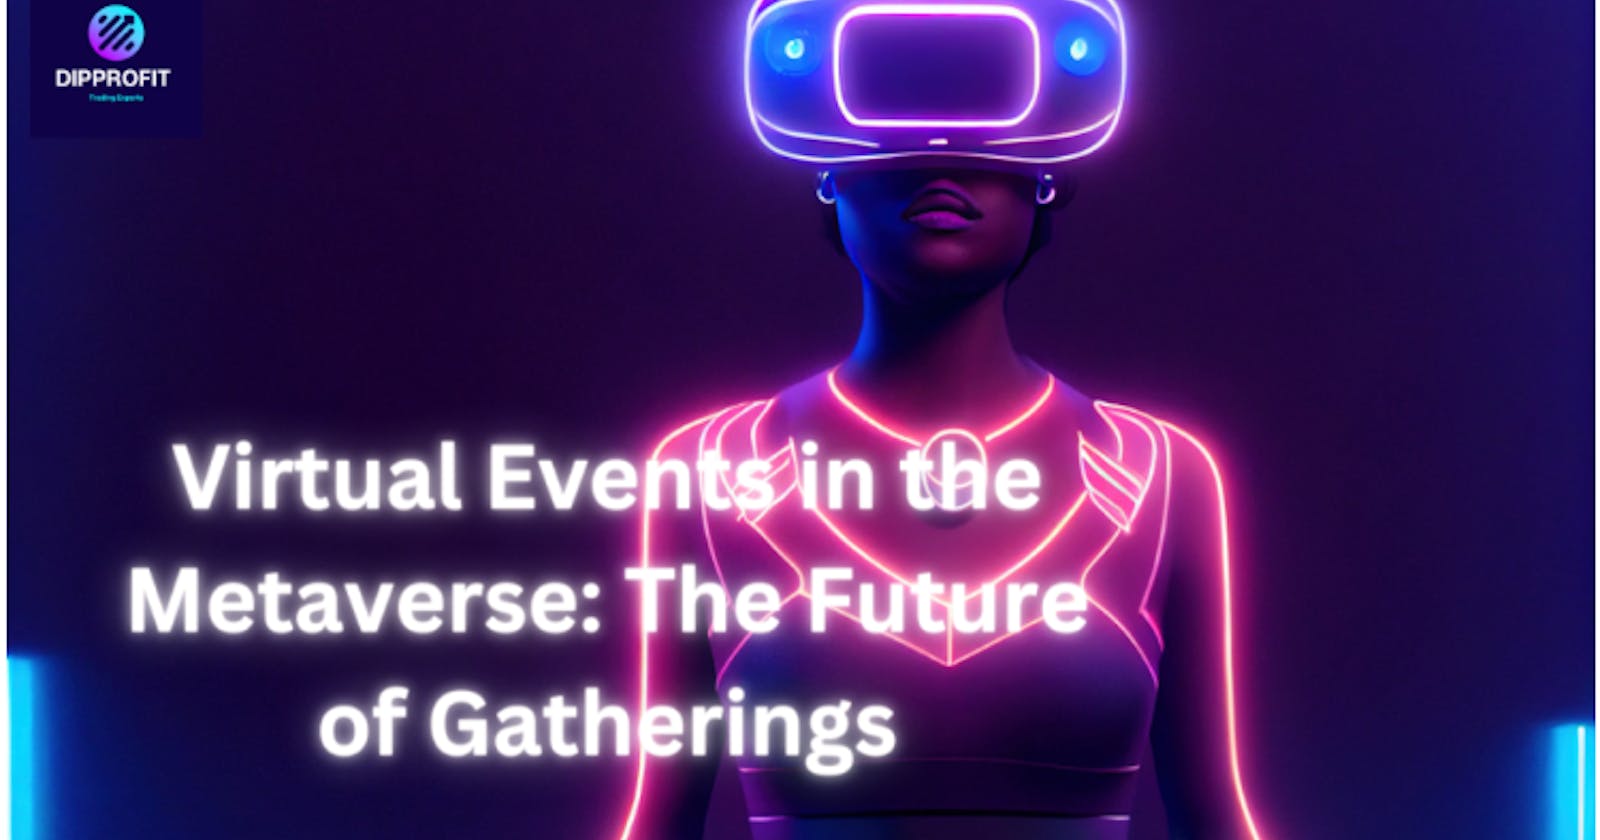 Mindblowing Virtual events in the Metaverse